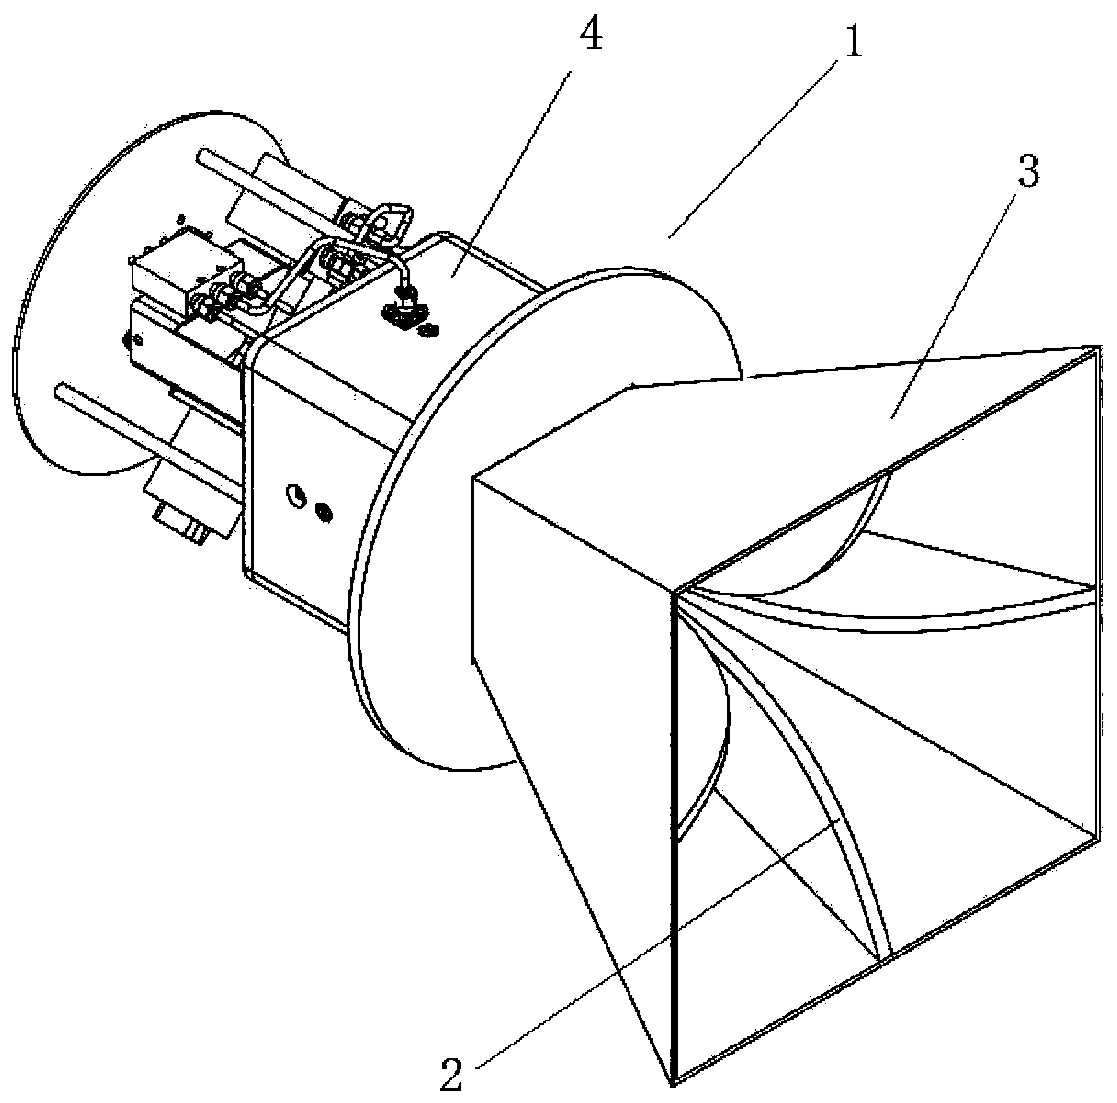 Electric-control switching multi-polarization horn antenna